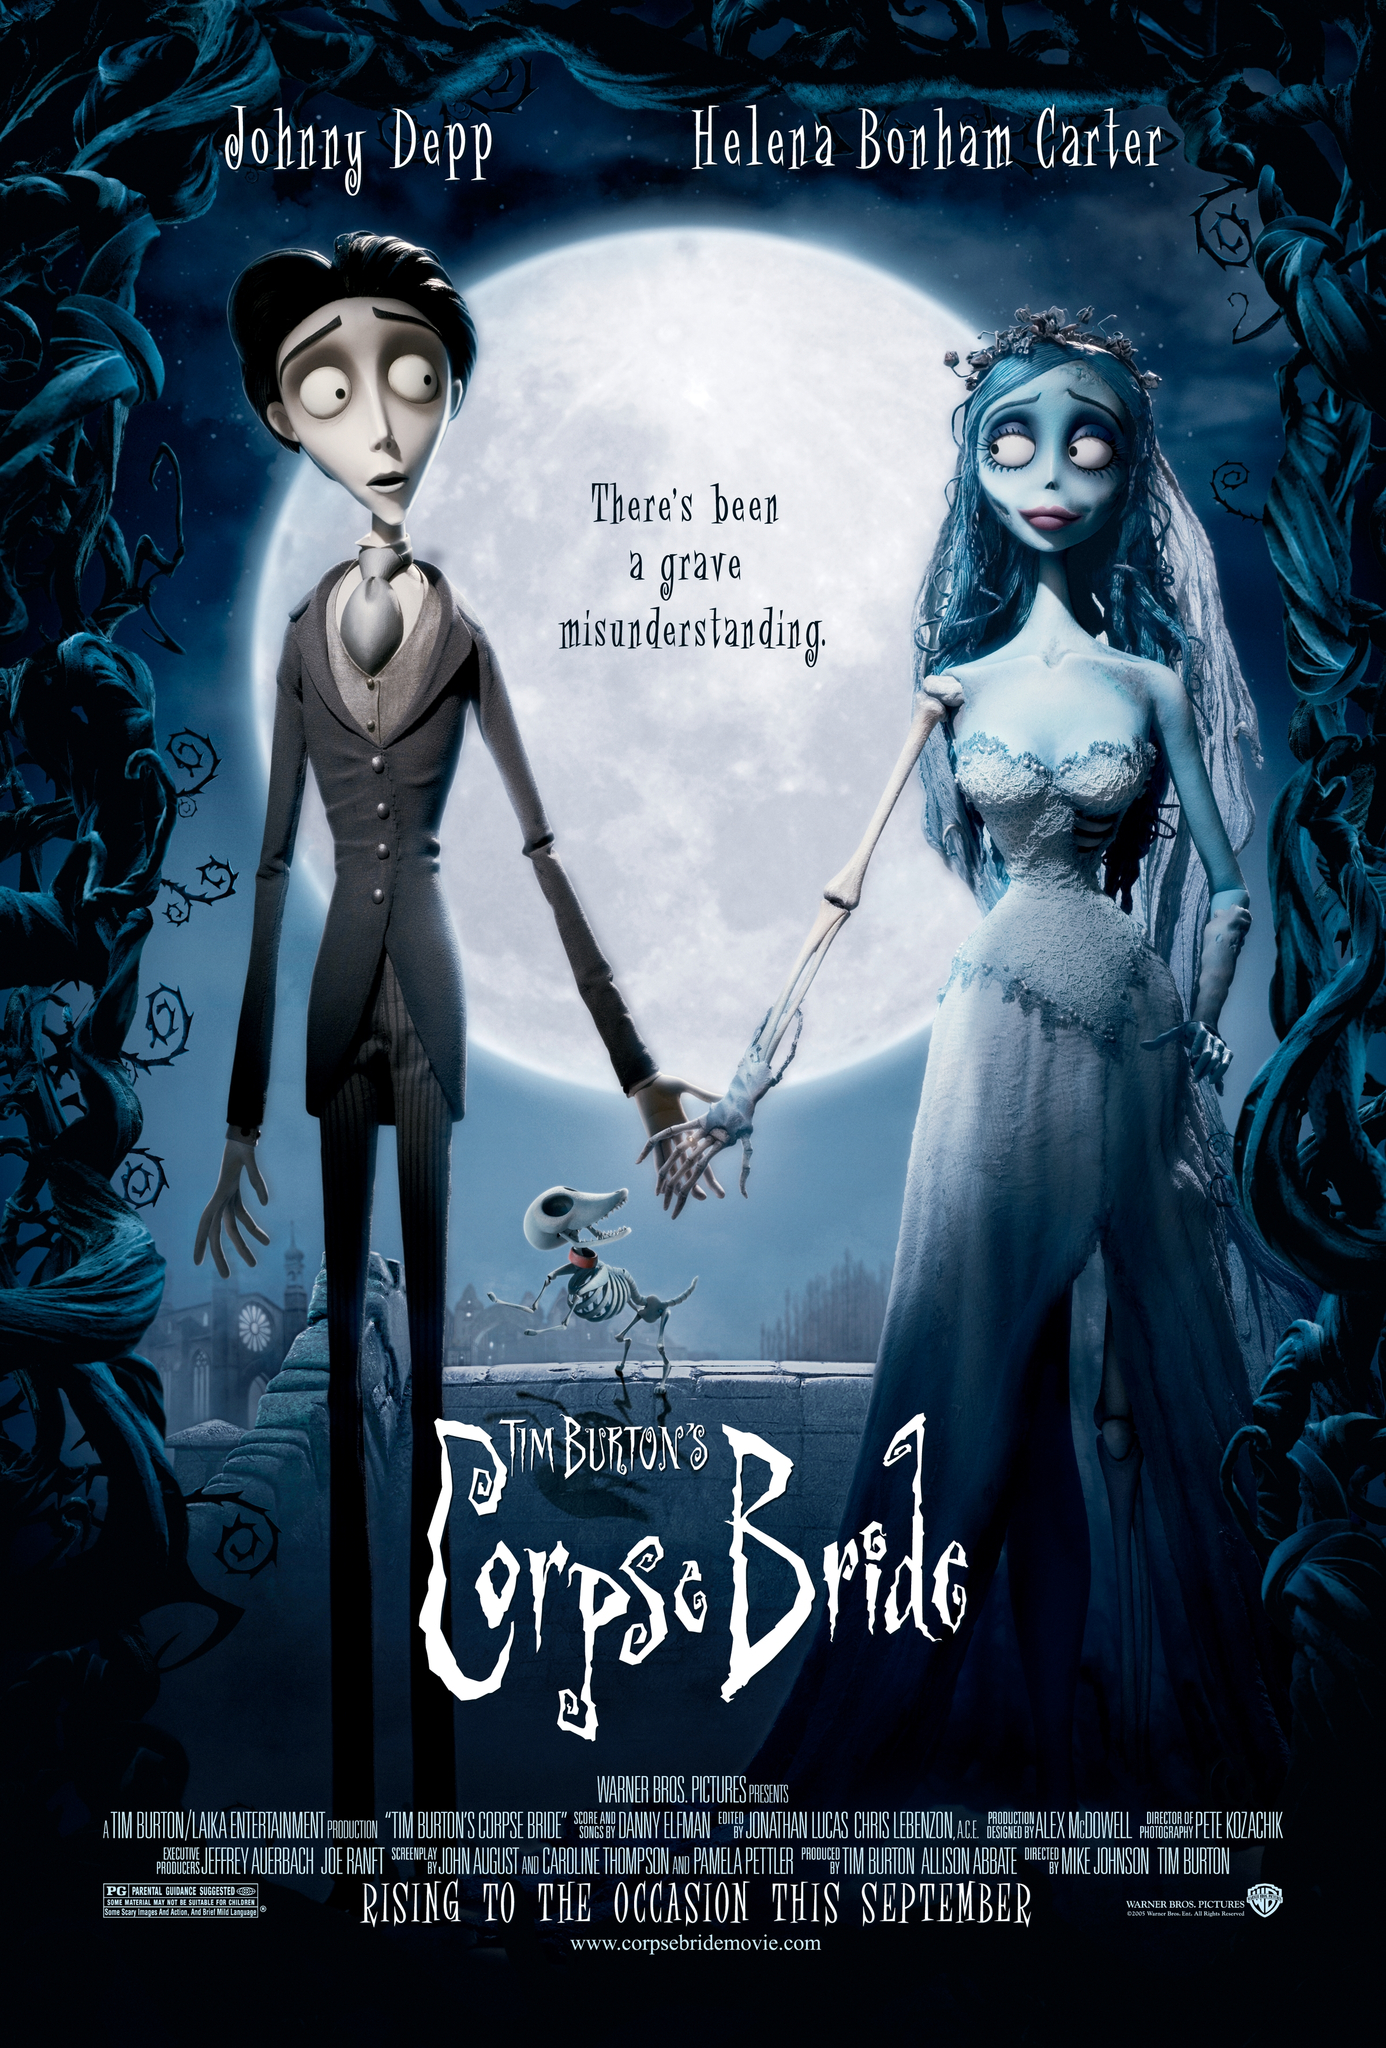 Corpse Bride- Halloween Movies For Family